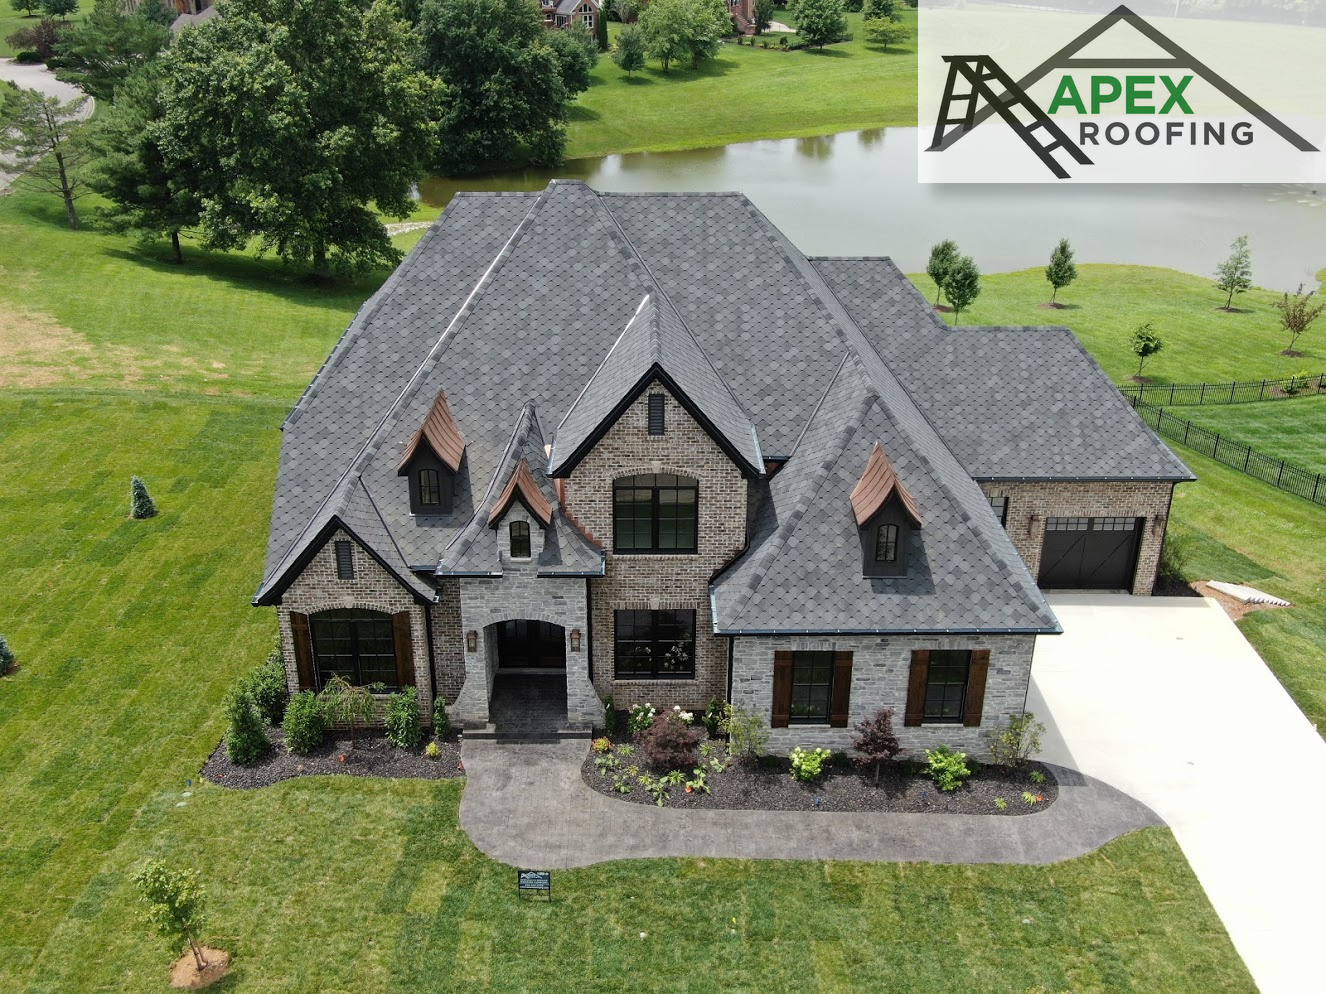 Apex Roofing of Greater Kentucky